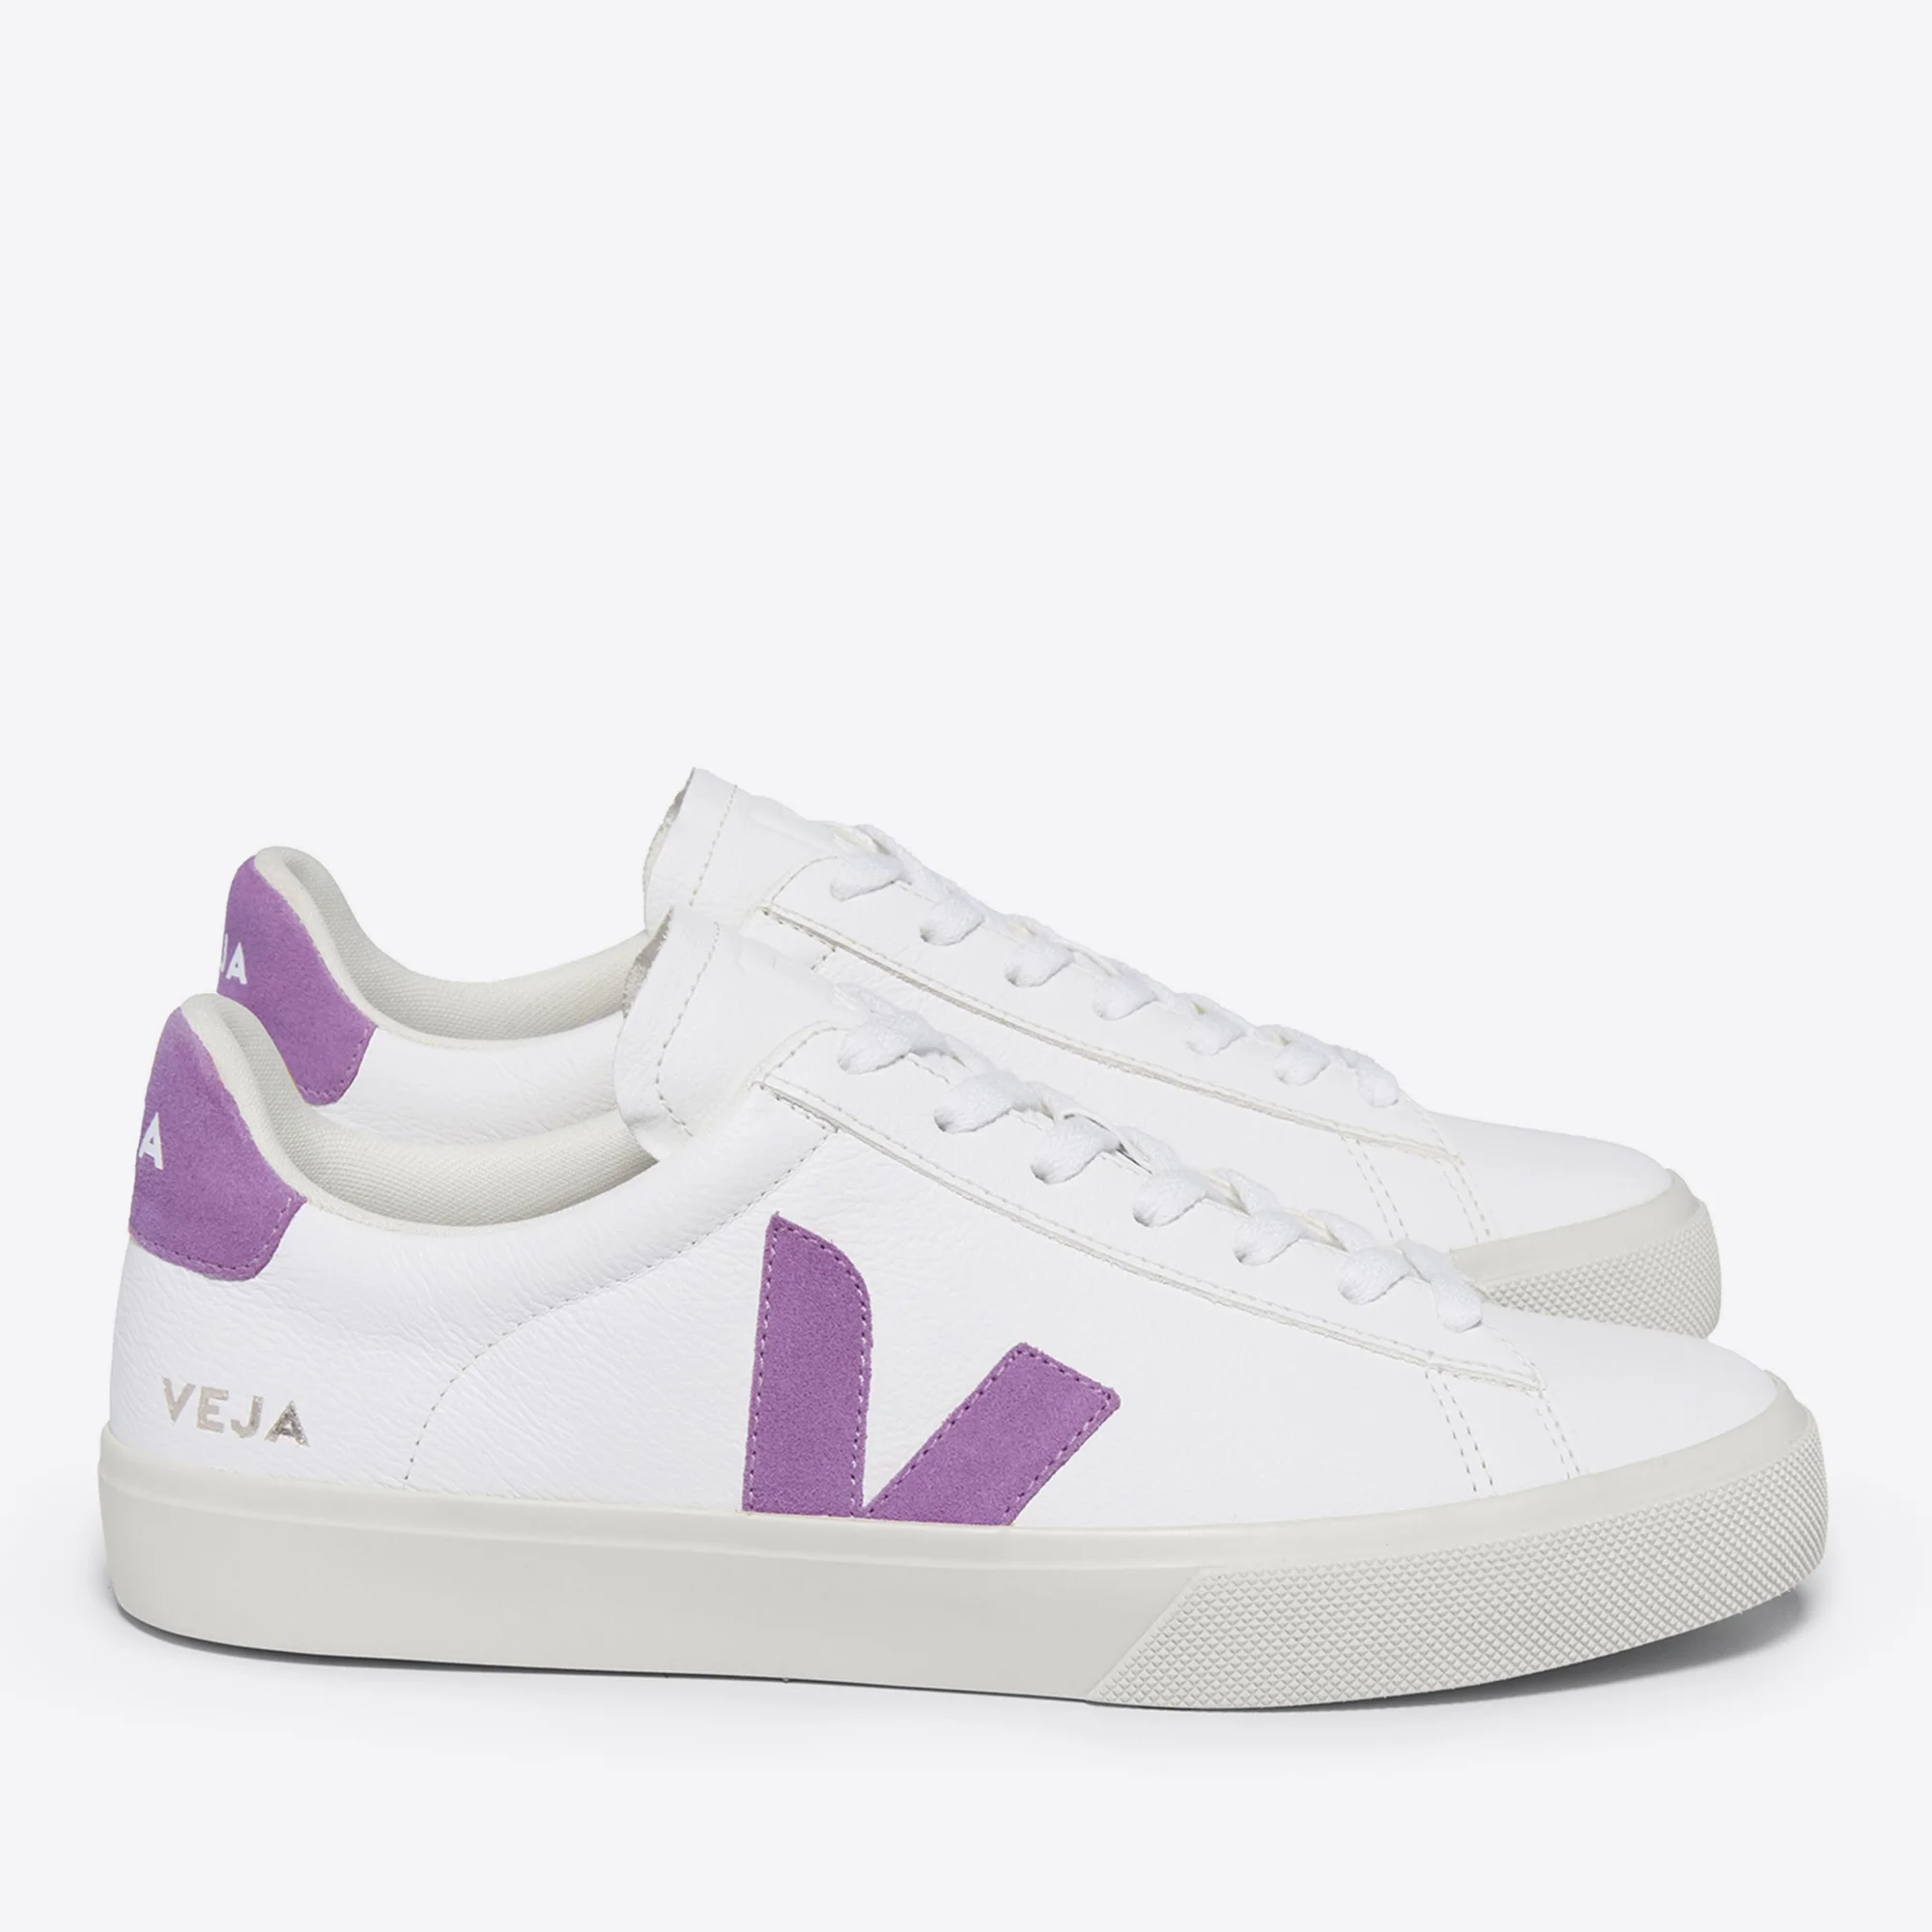 Veja Women's Campo Chrome-Free Leather Trainers - UK 3 Image 1